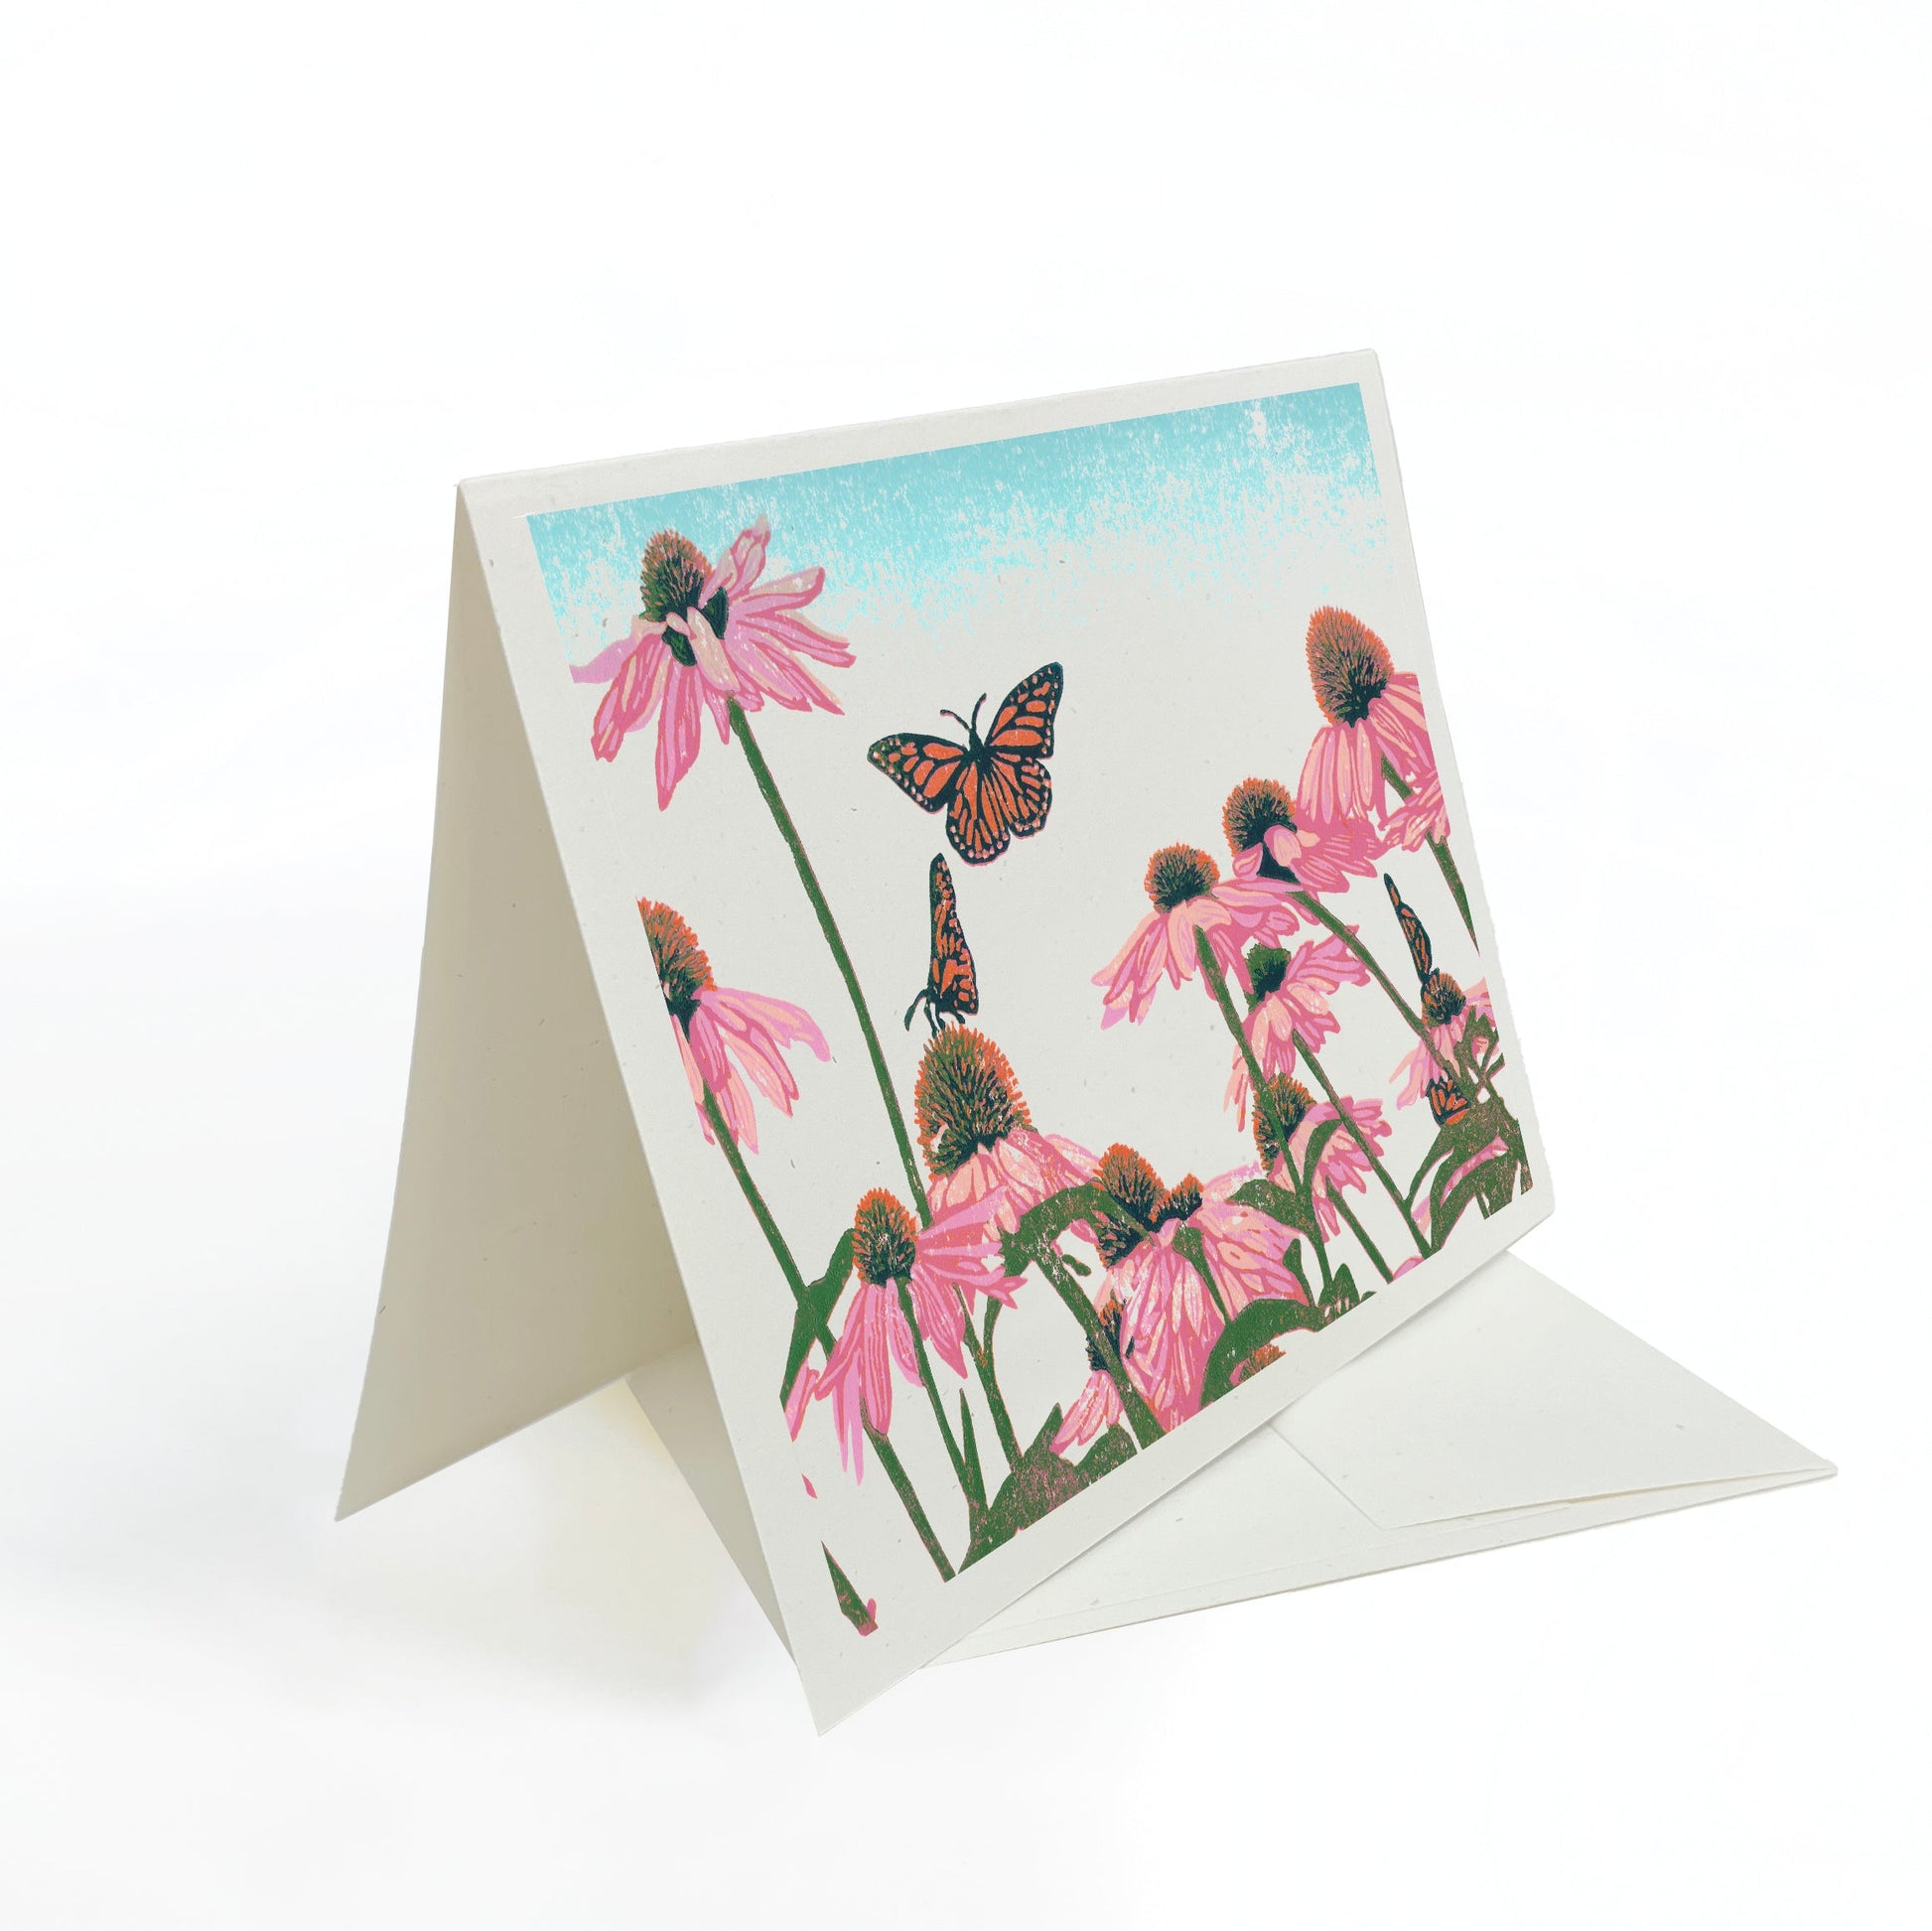 A casually elegant card featuring floral art by Natalia Wohletz titled Coneflower Patch.